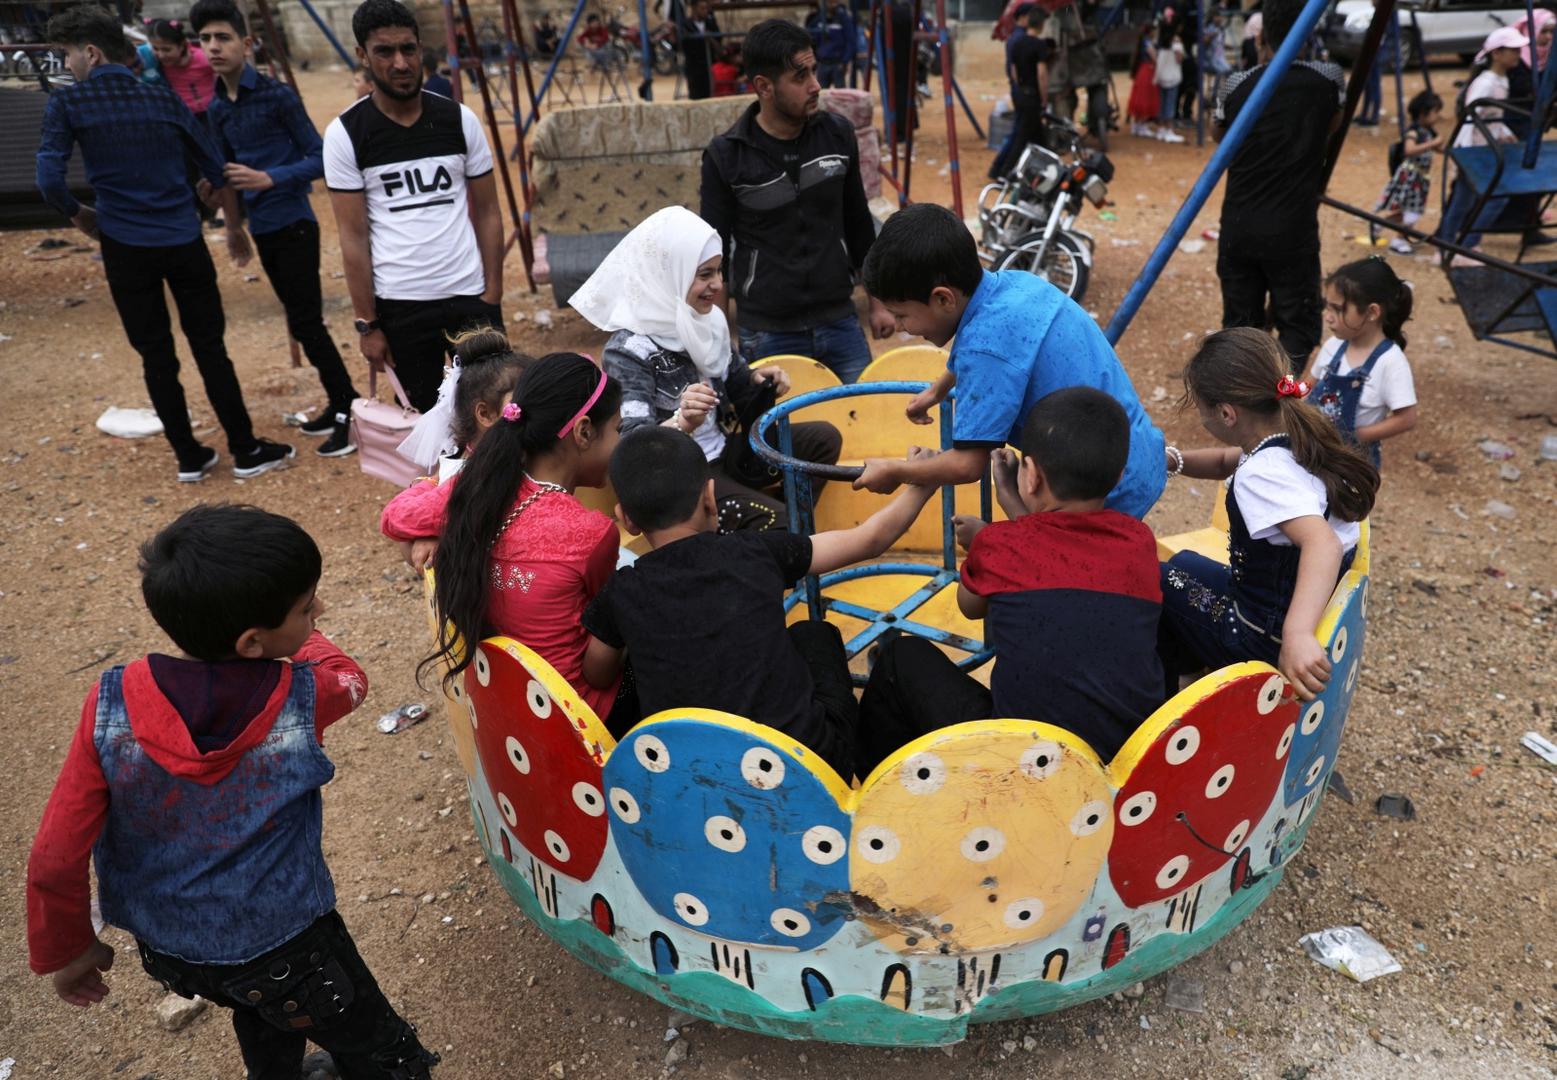 Children play at a makeshift amusement park to celebrate the Muslim holiday of Eid al-Fitr in Idlib city Children play at a makeshift amusement park to celebrate the Muslim holiday of Eid al-Fitr, amid the global outbreak of the coronavirus disease (COVID-19), in the opposition-held Idlib city in northwest Syria, May 24, 2020. REUTERS/Khalil Ashawi KHALIL ASHAWI